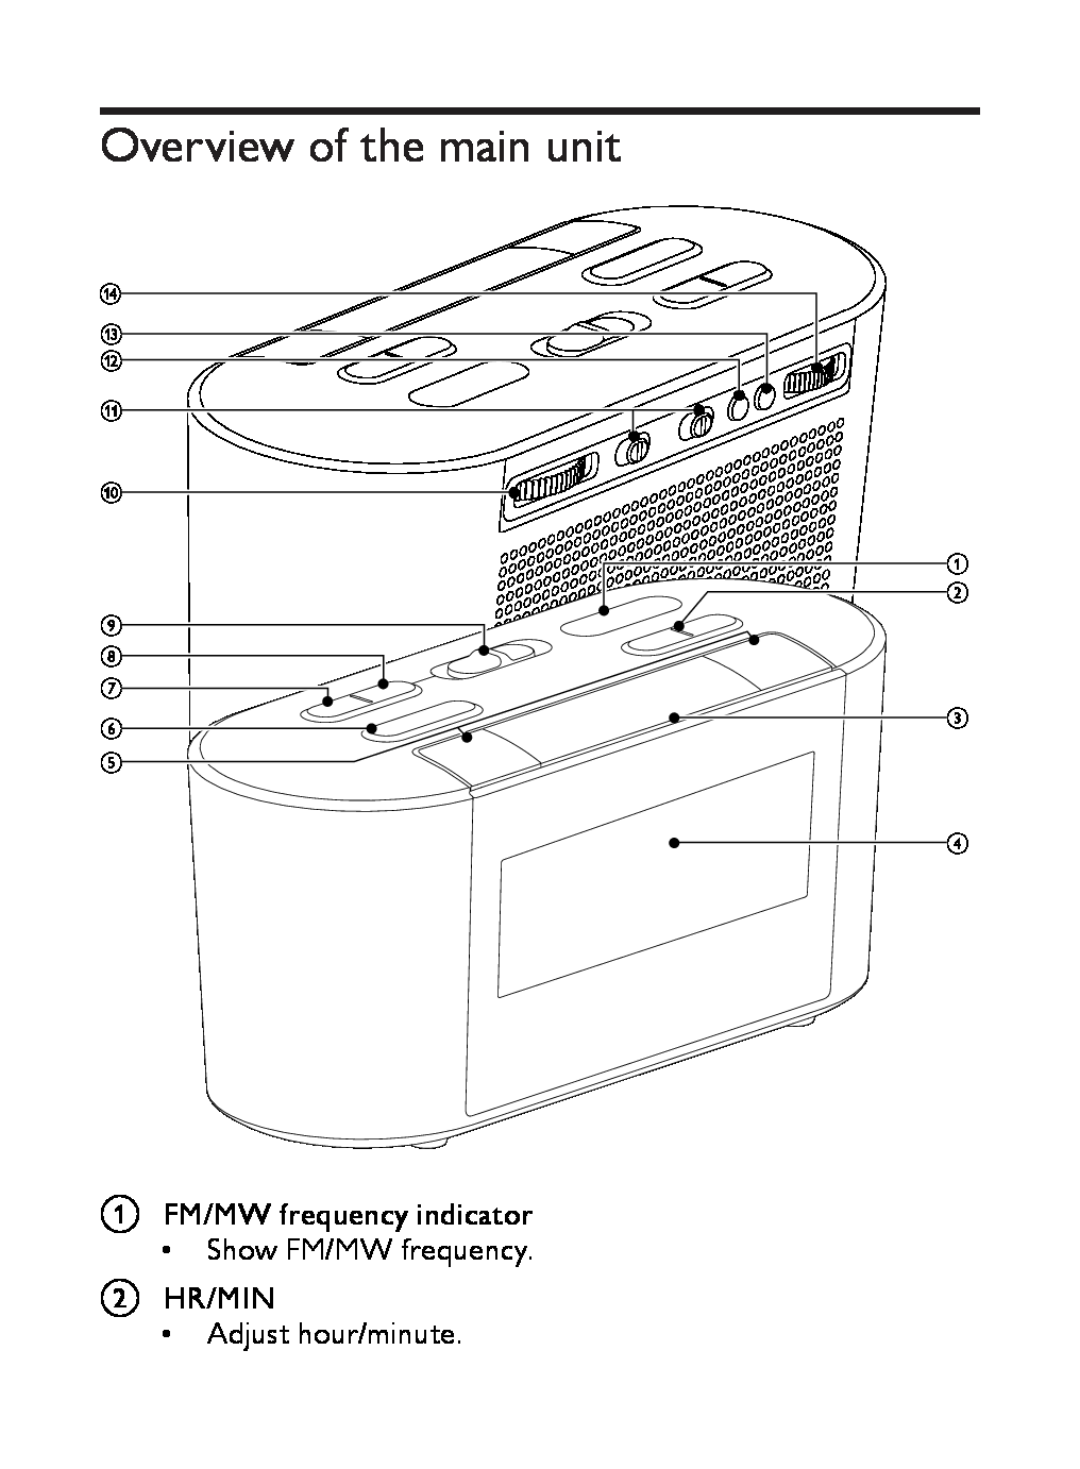 Philips AJ3500 Overview of the main unit, A FM/MW frequency indicator Show FM/MW frequency B HR/MIN, Adjust hour/minute 